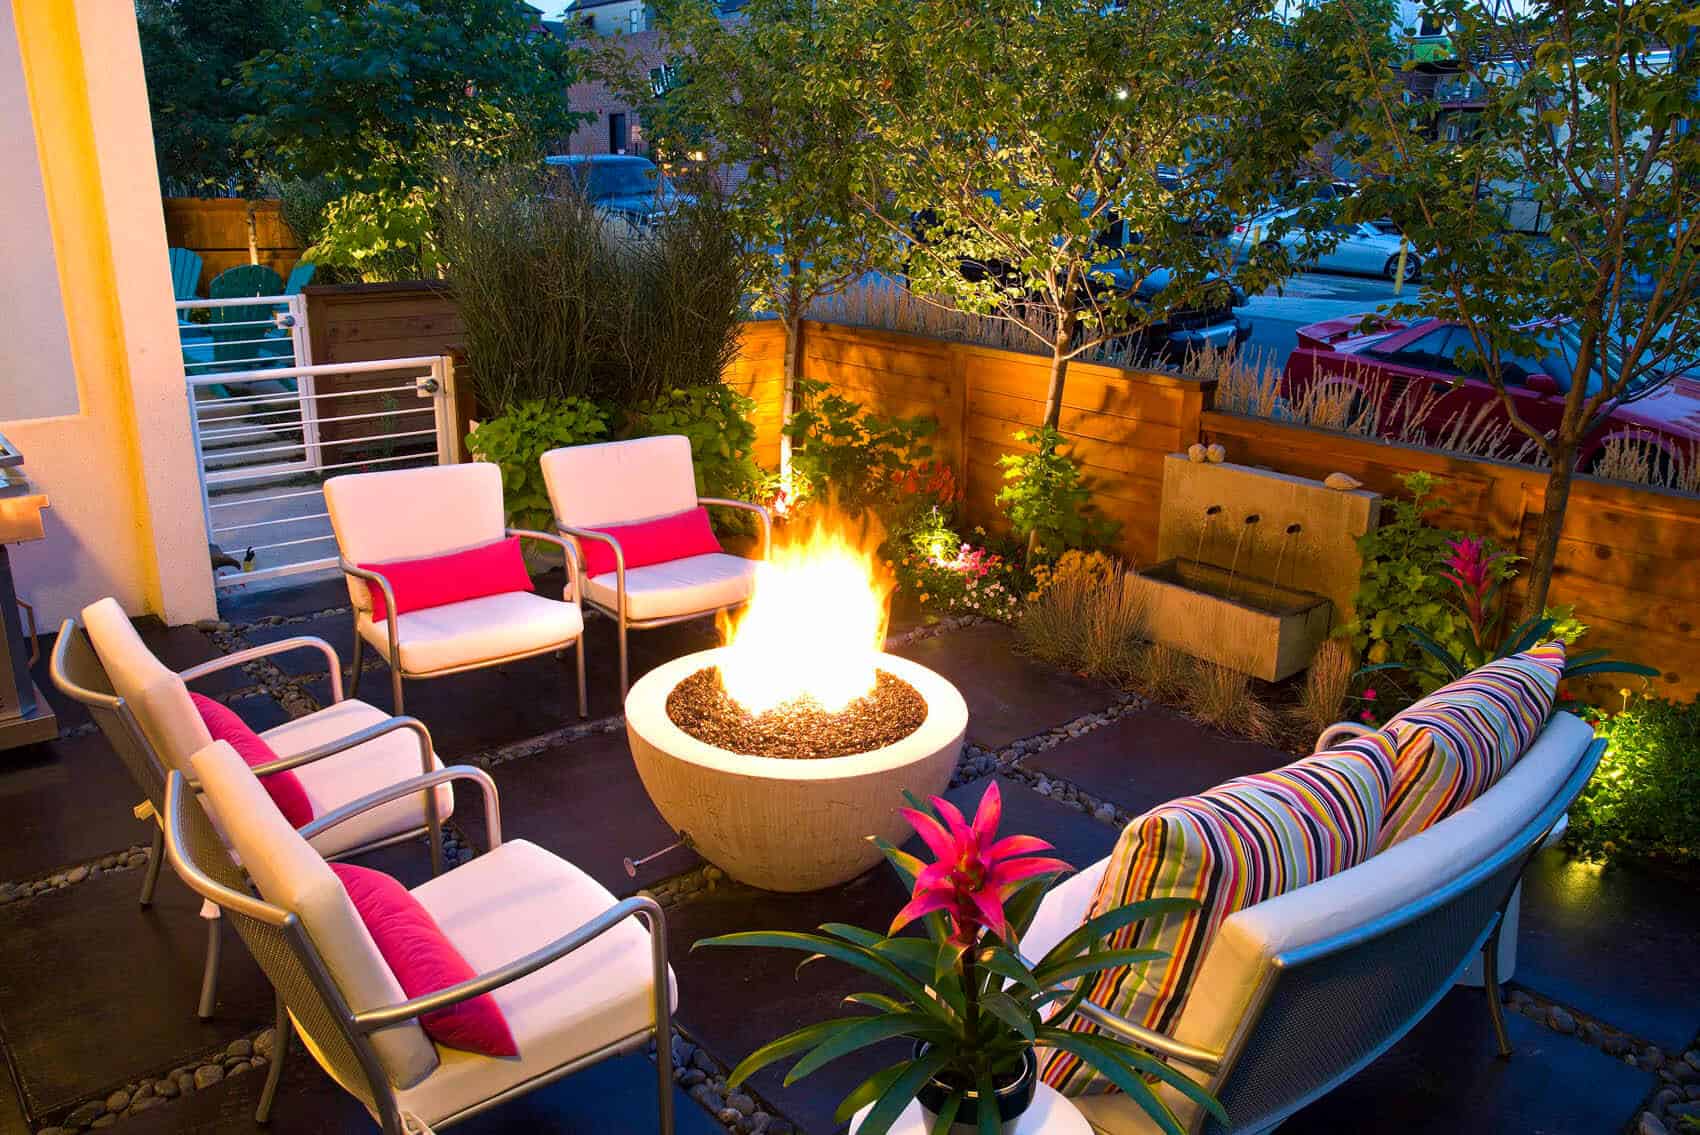 Blog Featured – Designing Outdoor Rooms for Year-Round Entertaining